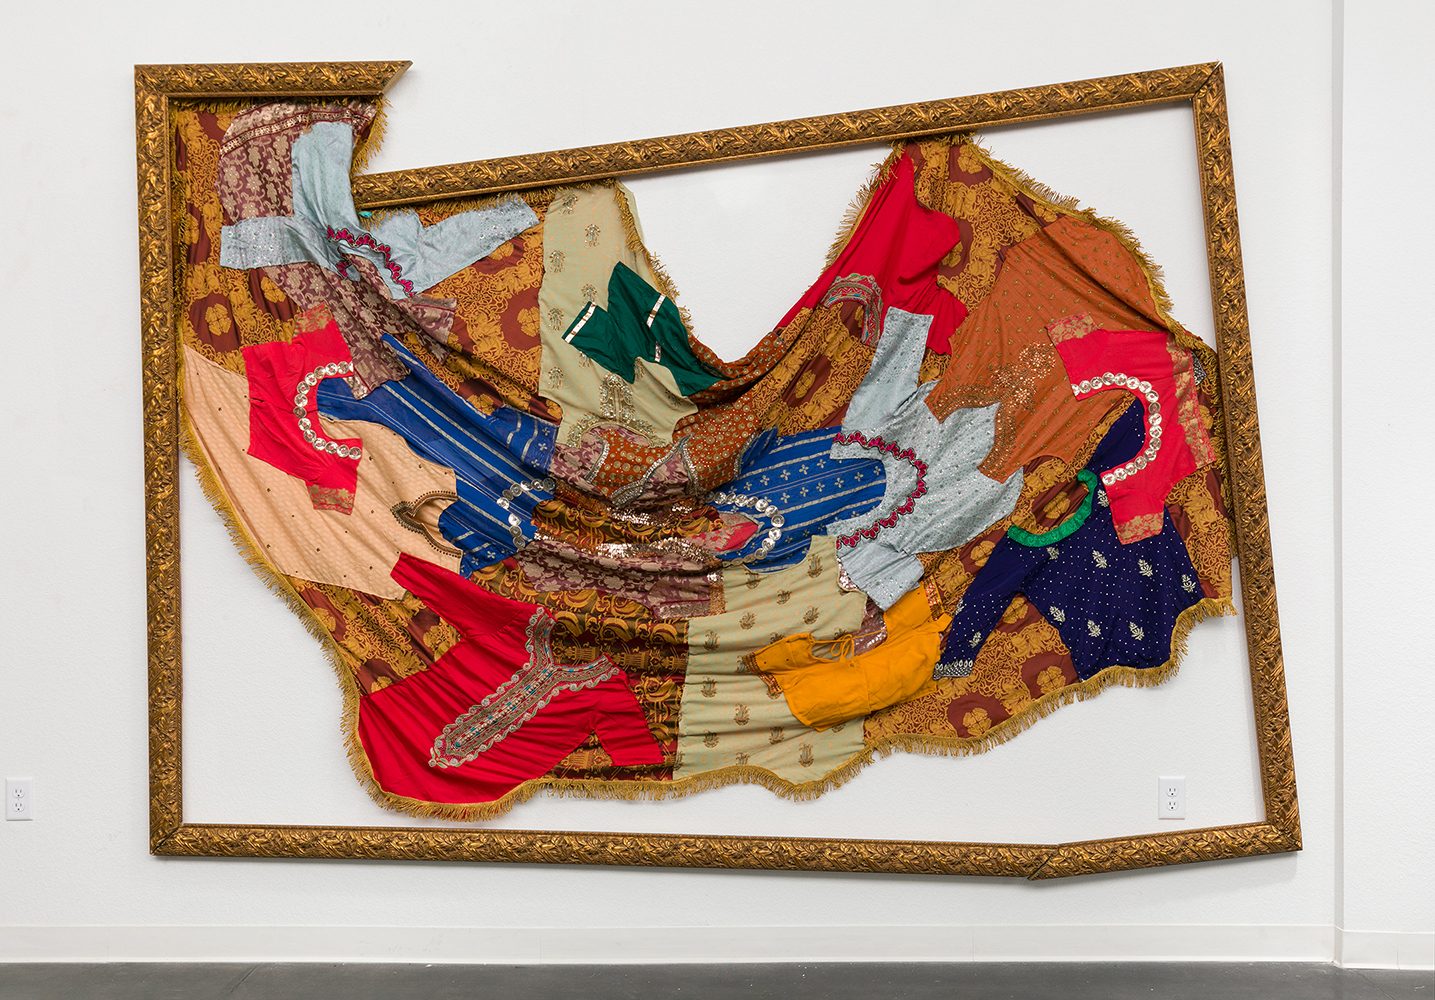 A broken picture frame contains a tattered quilt made of small pieces of clothing